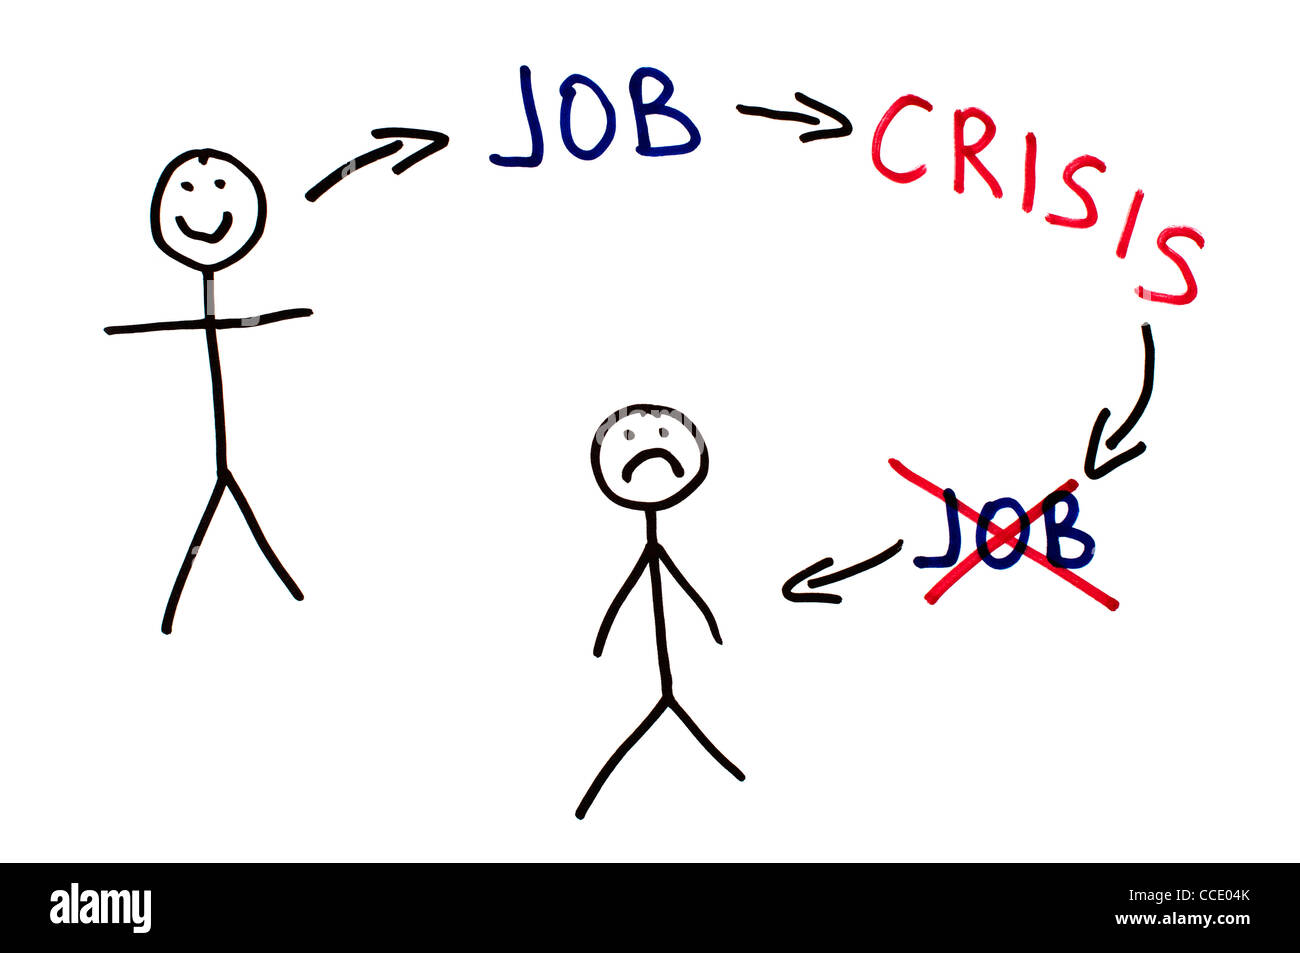 Job and crisis conception illustration over white. Stock Photo